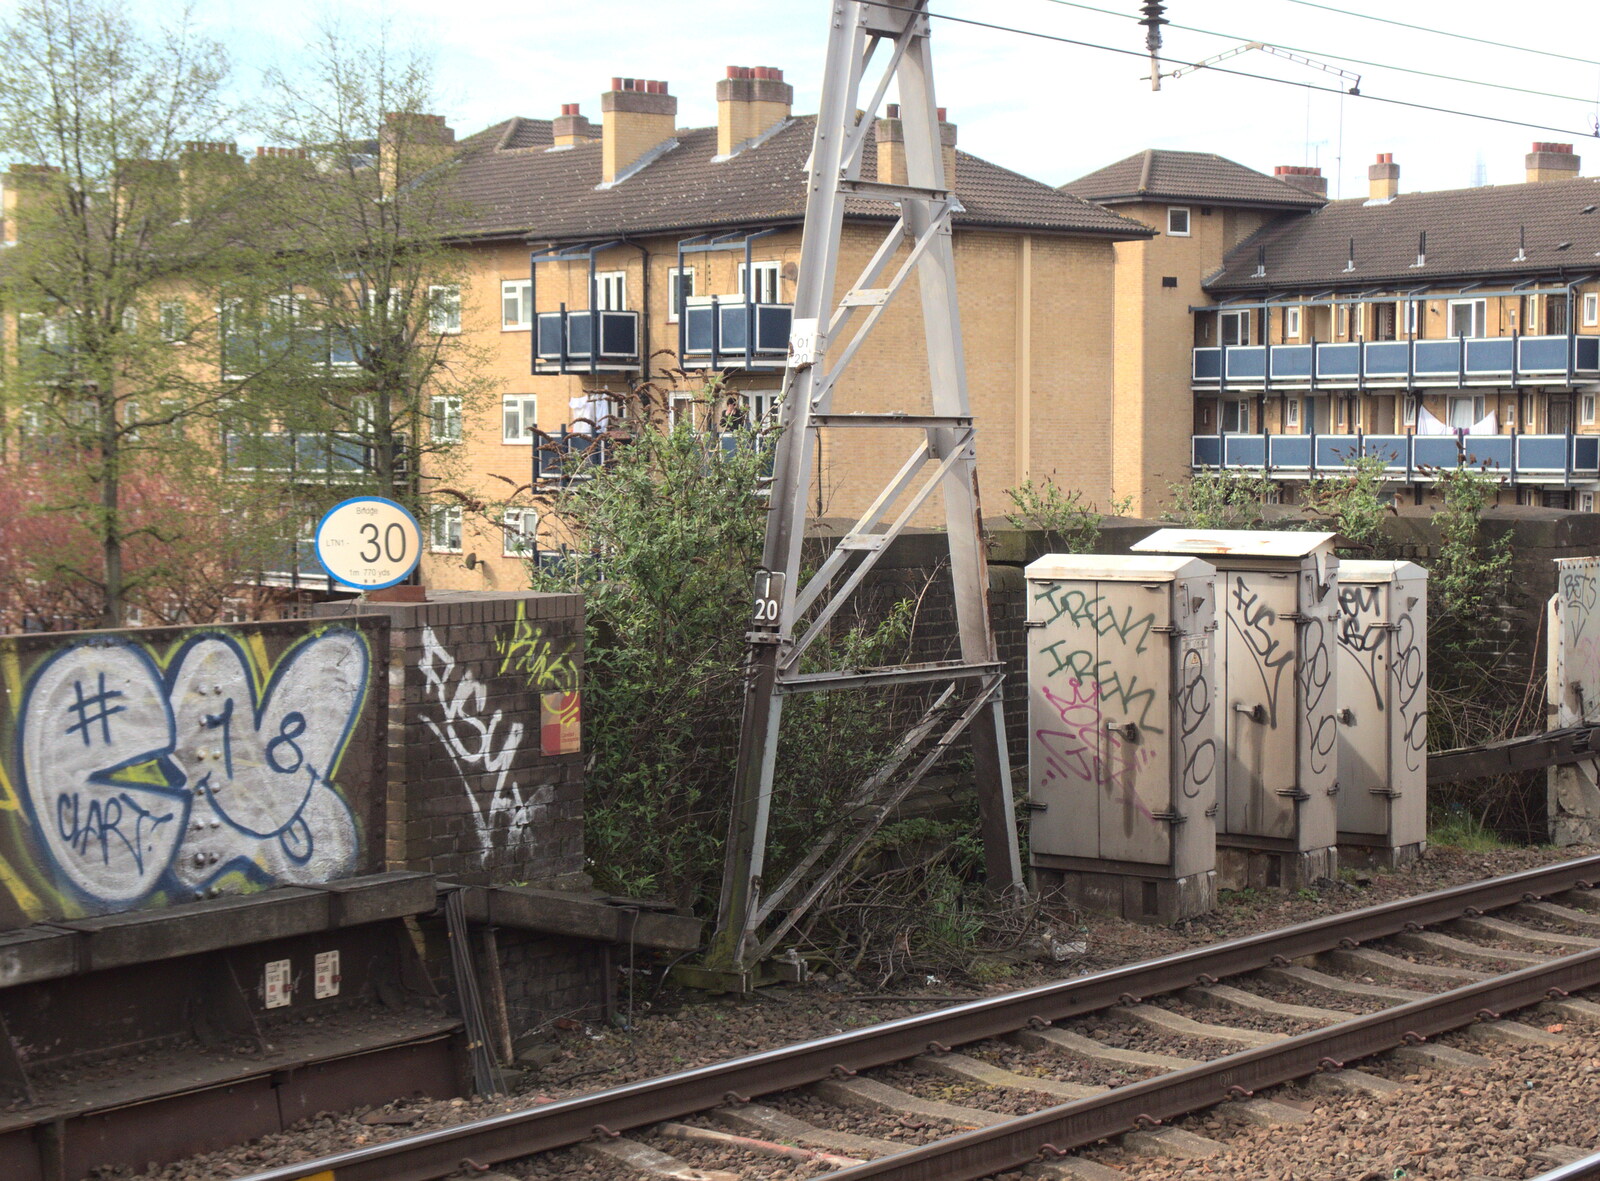 Trackside graffiti in London from Commonwealth Chaos, and the BSCC at Gissing, London and Norfolk - 18th April 2018